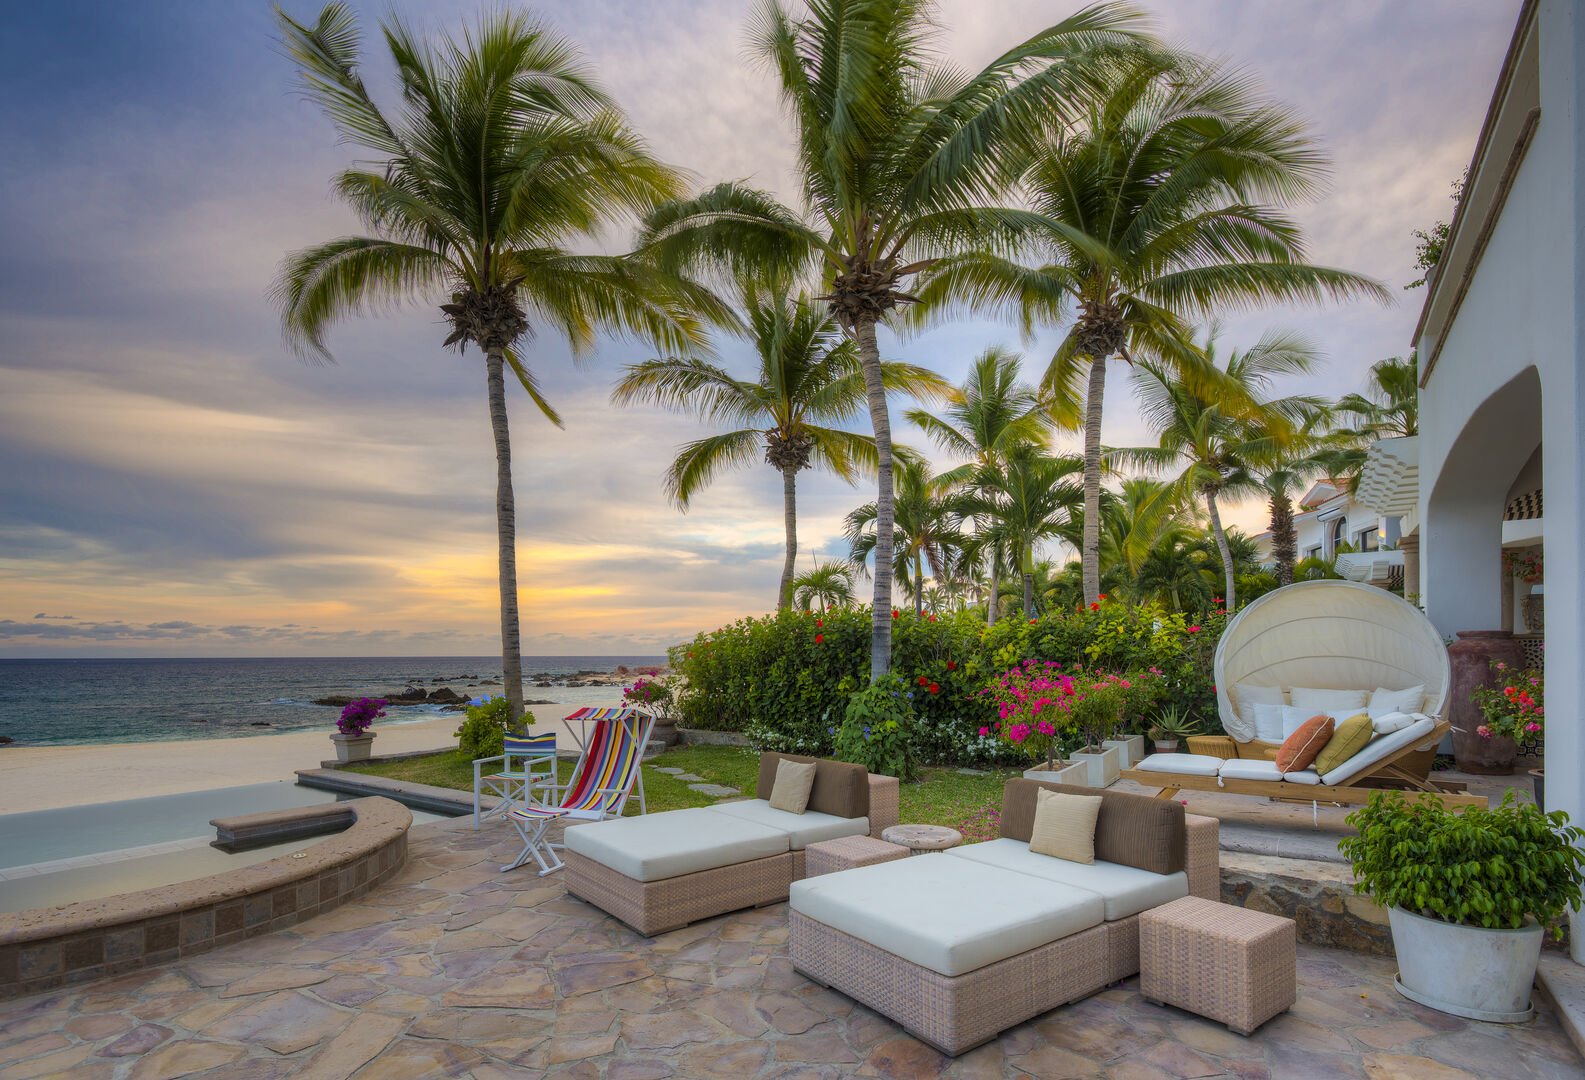 Outdoor furniture by the beachfront pool